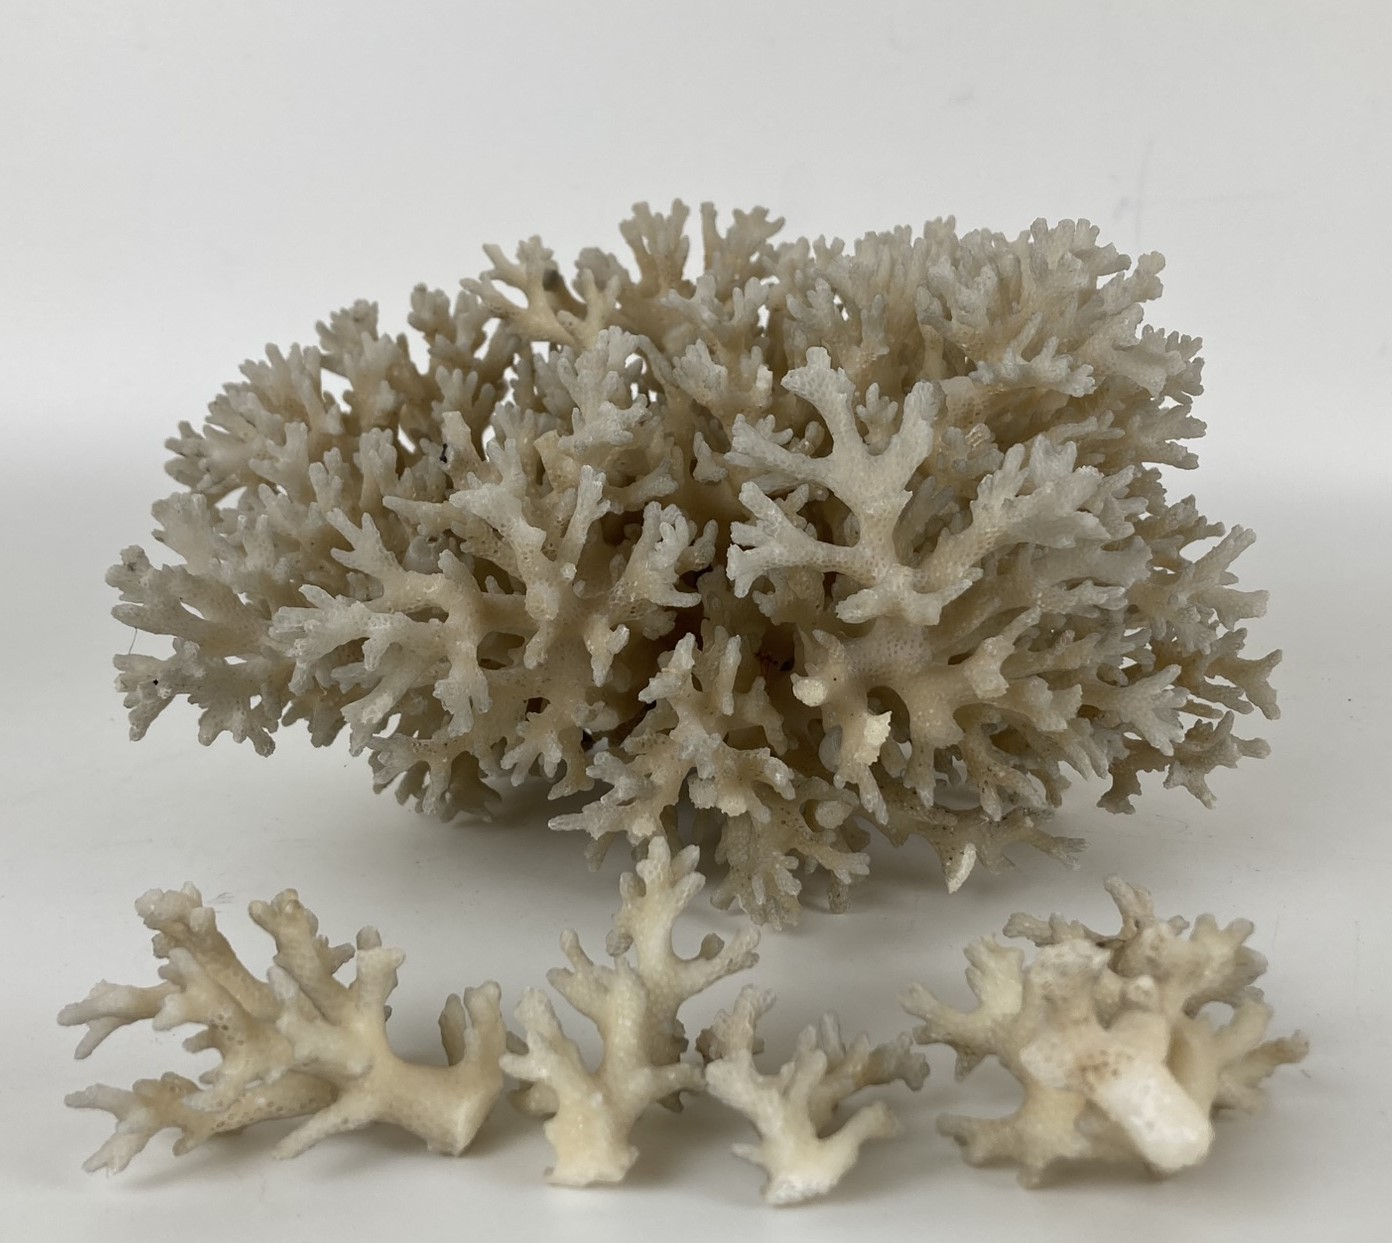 A piece of coral